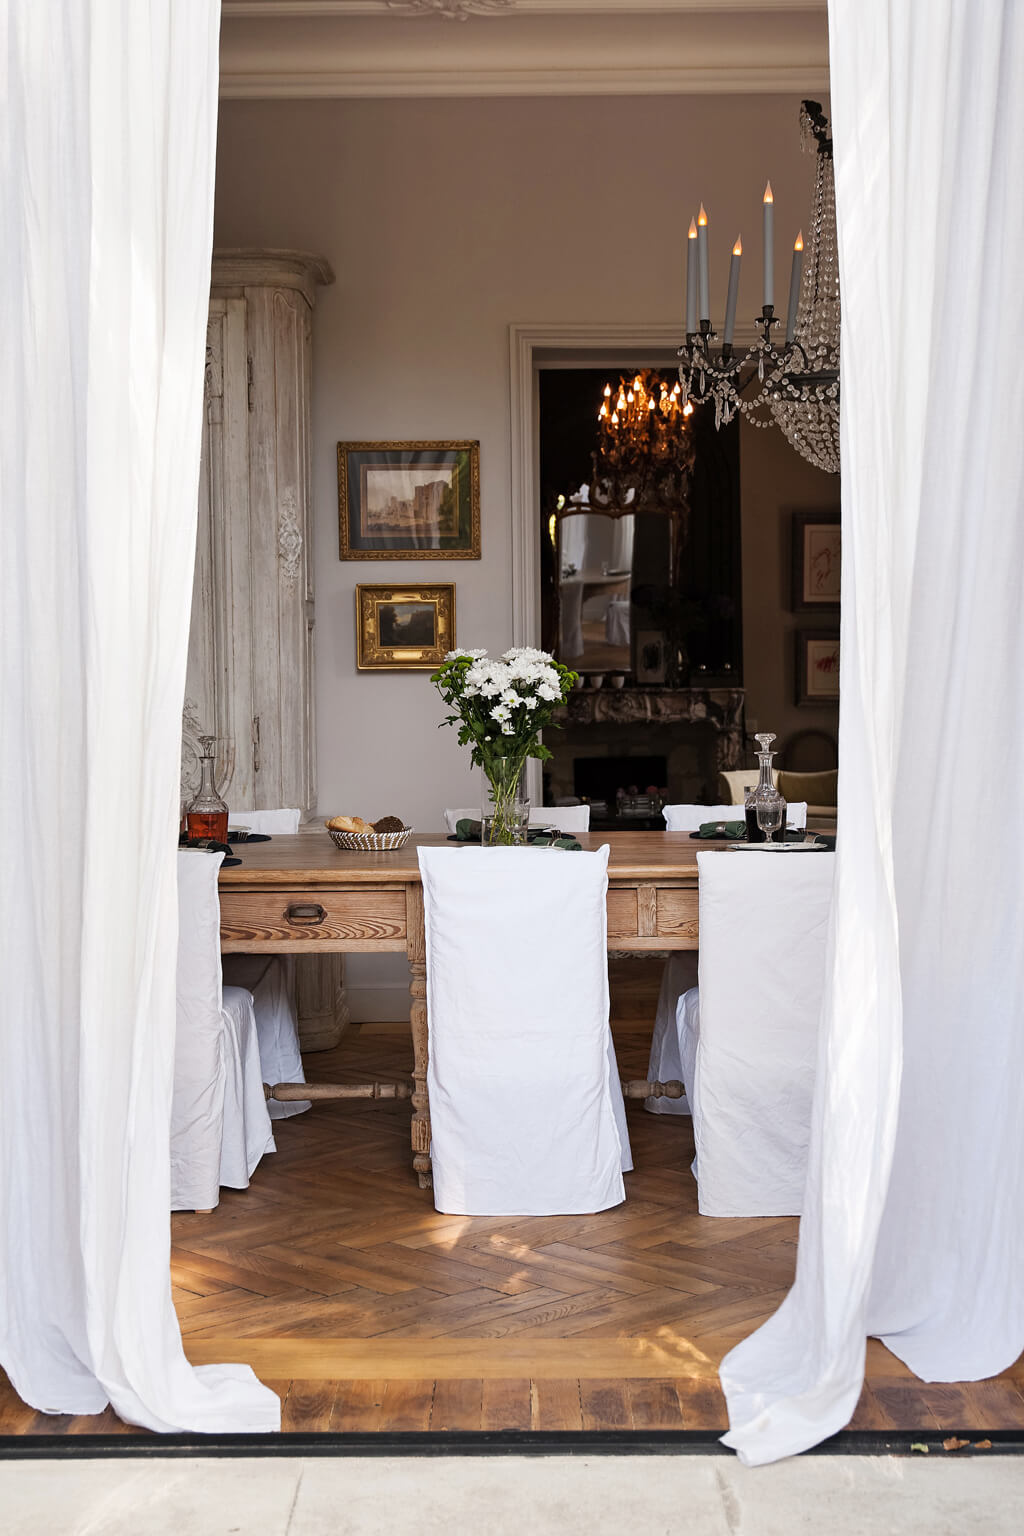 White slipcovered dining chairs with rustic oak farm table in an Avignon dining room. Come see a Breathtaking French Château Tour in Provence With Photo Gallery of Historical Architecture, Dramatic Eclectic Interiors & Oddities!